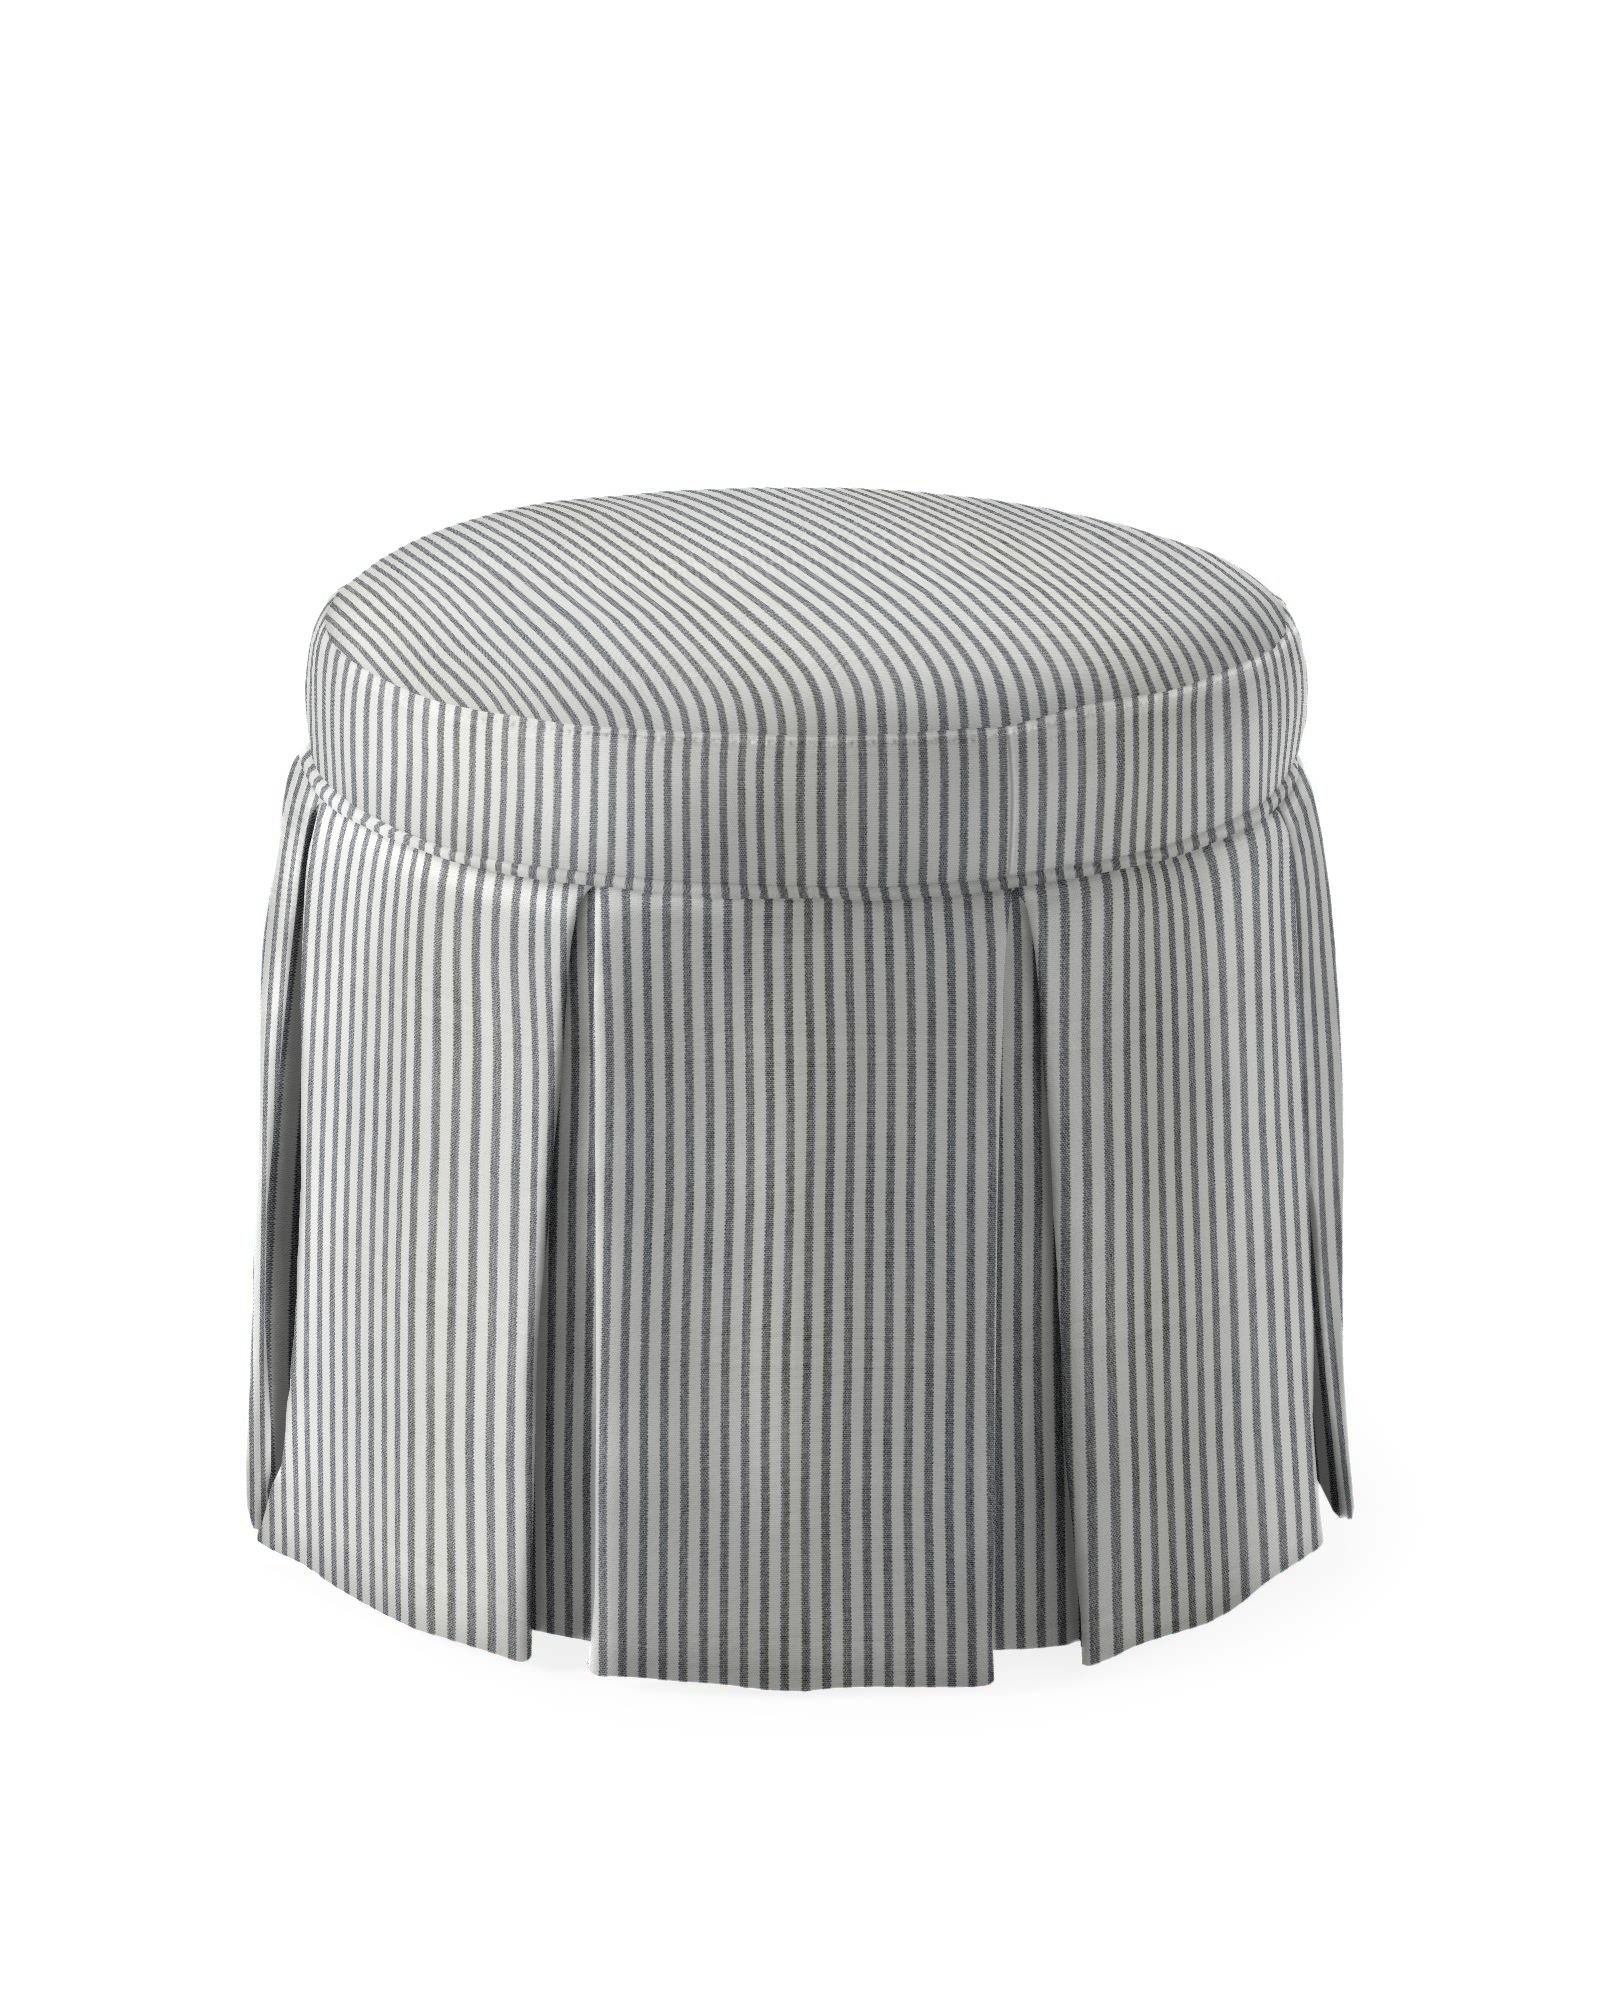 Harrison Round Stool - Skirted | Serena and Lily